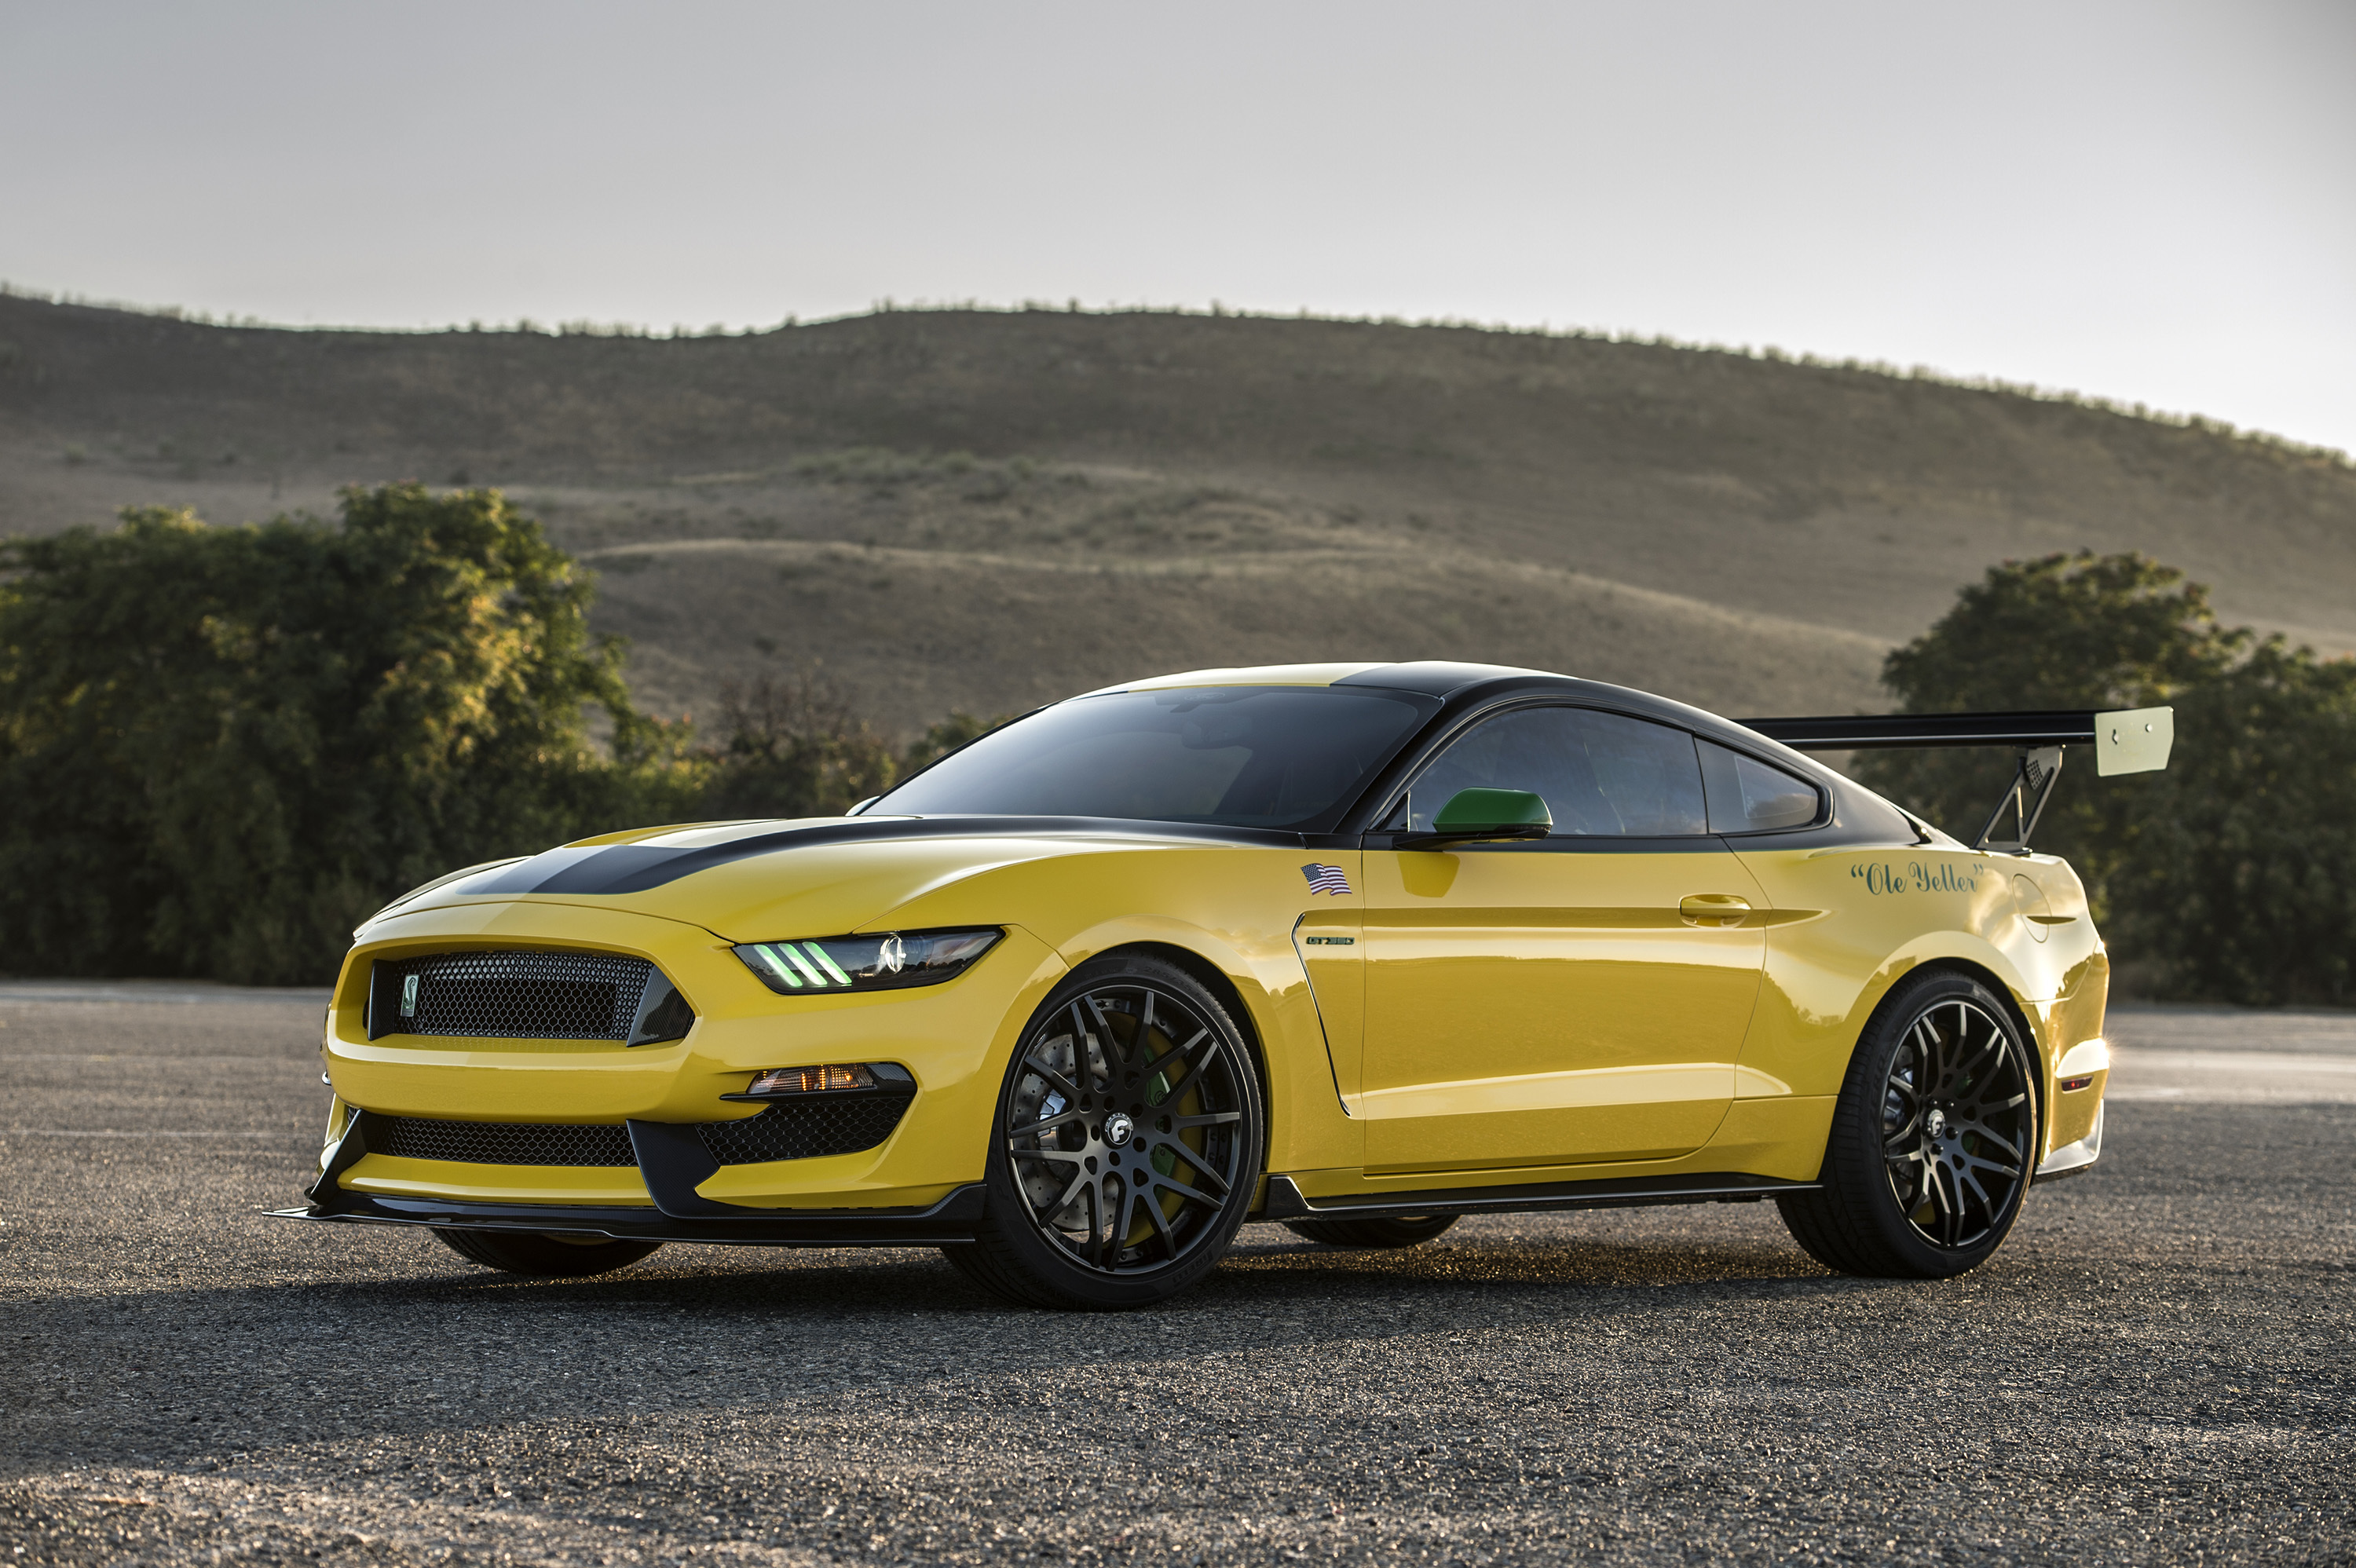 Free Images cars, yellow, mustang, gt350 Ford